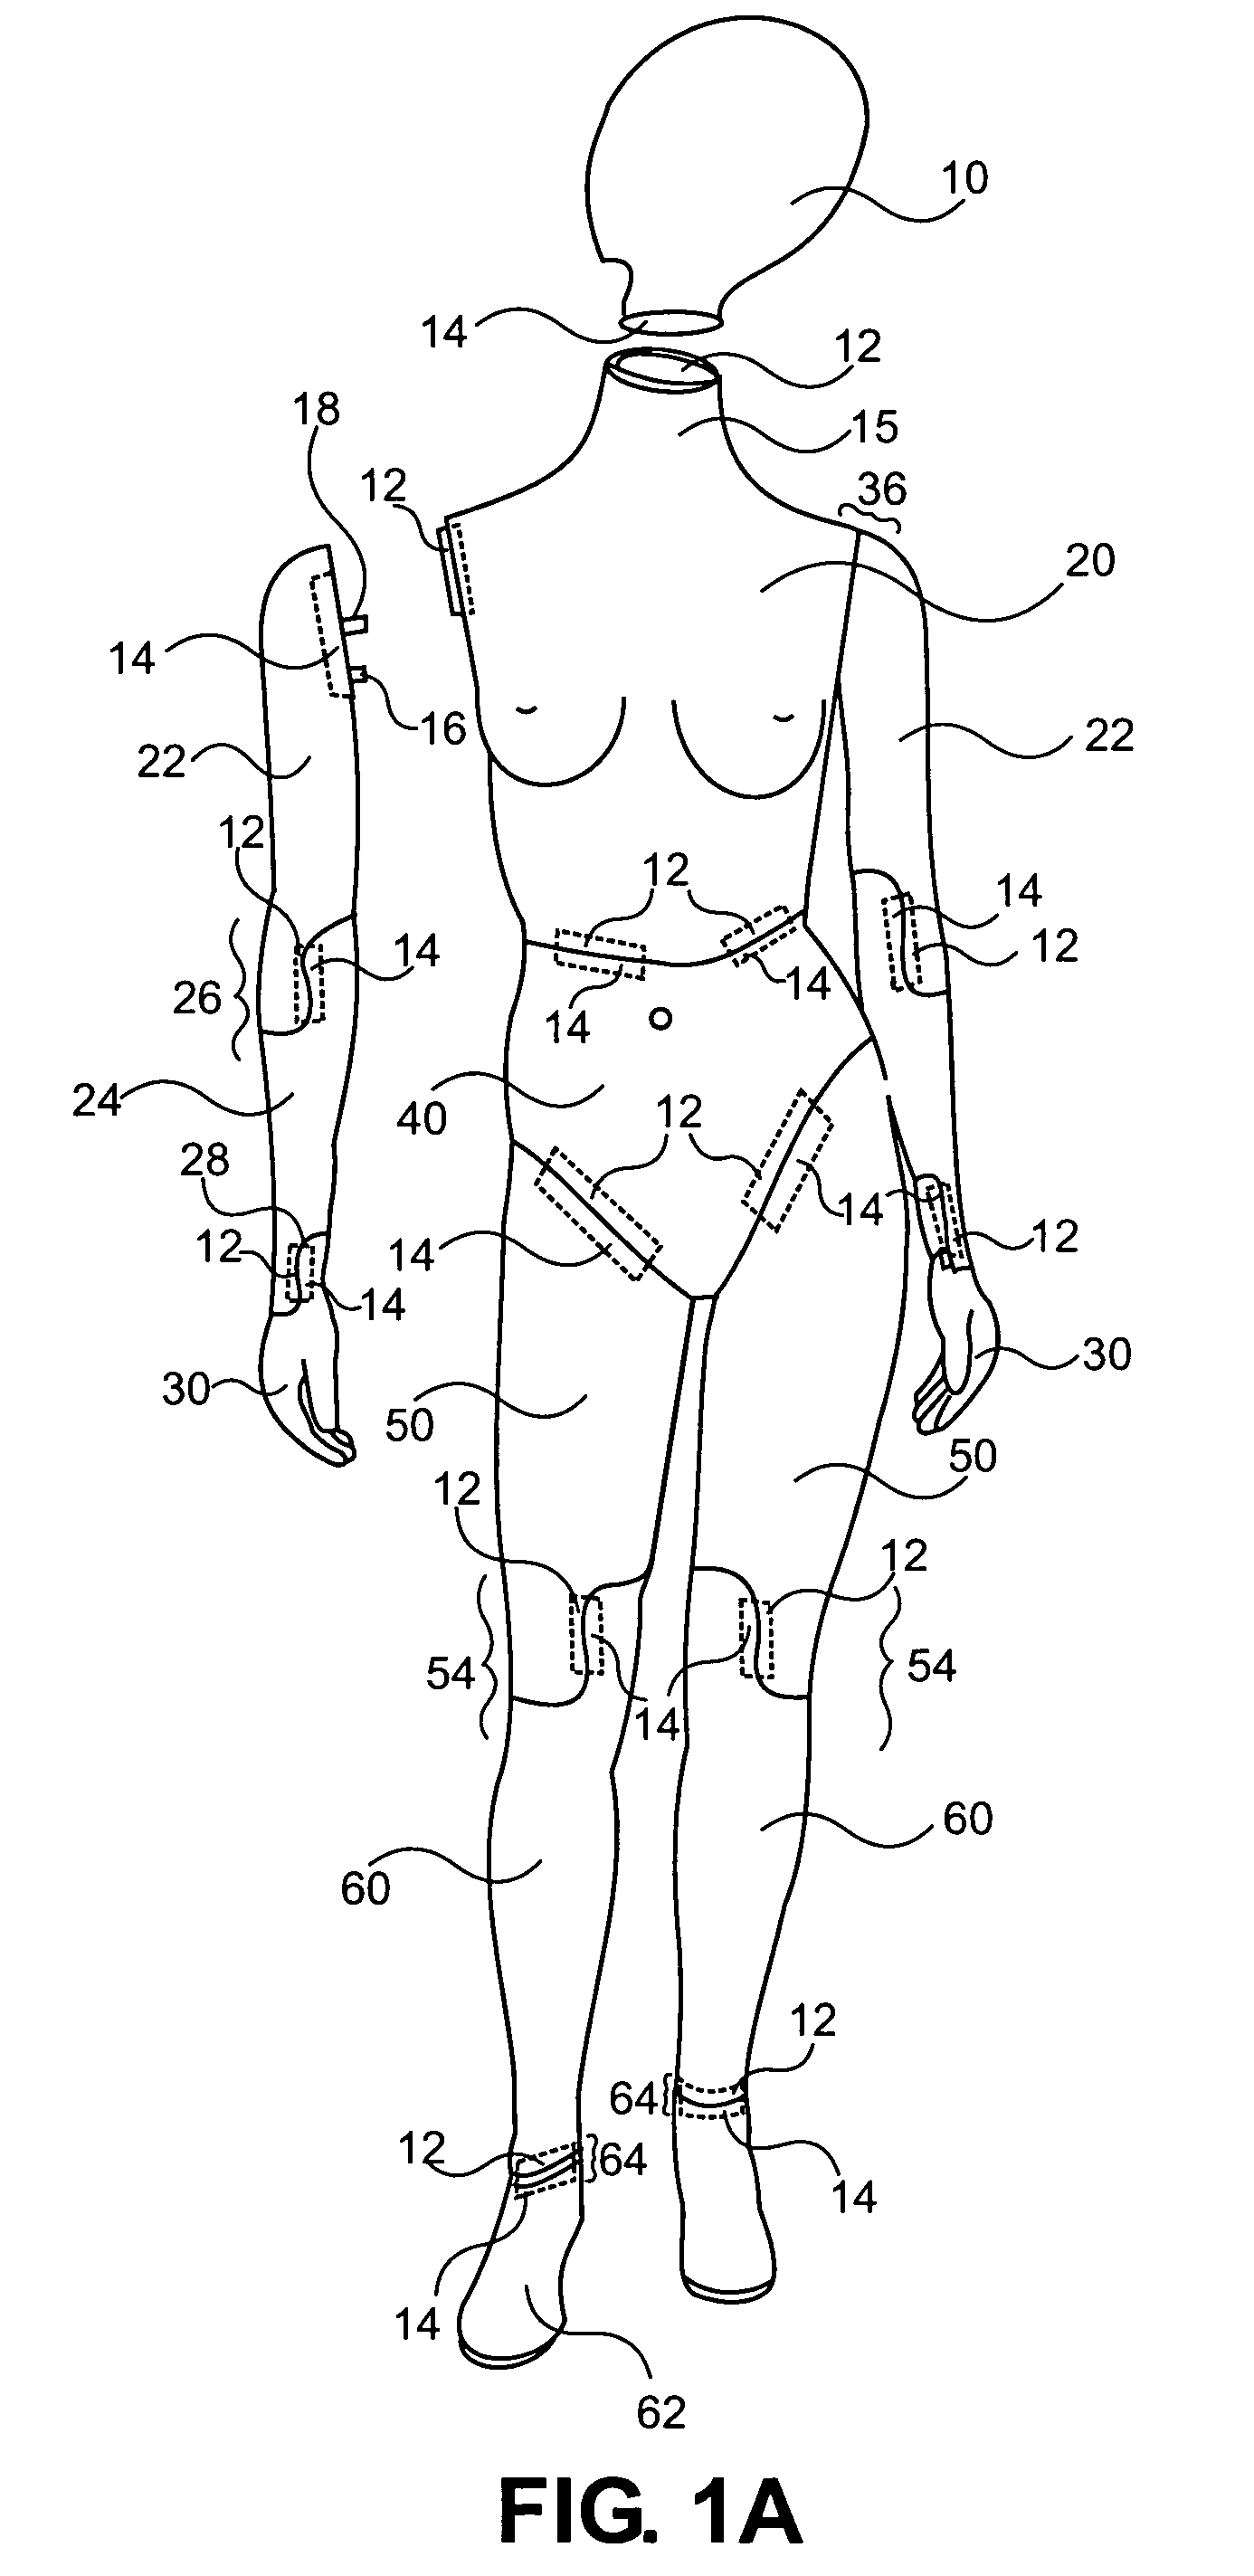 Display form having magnetically attachable parts